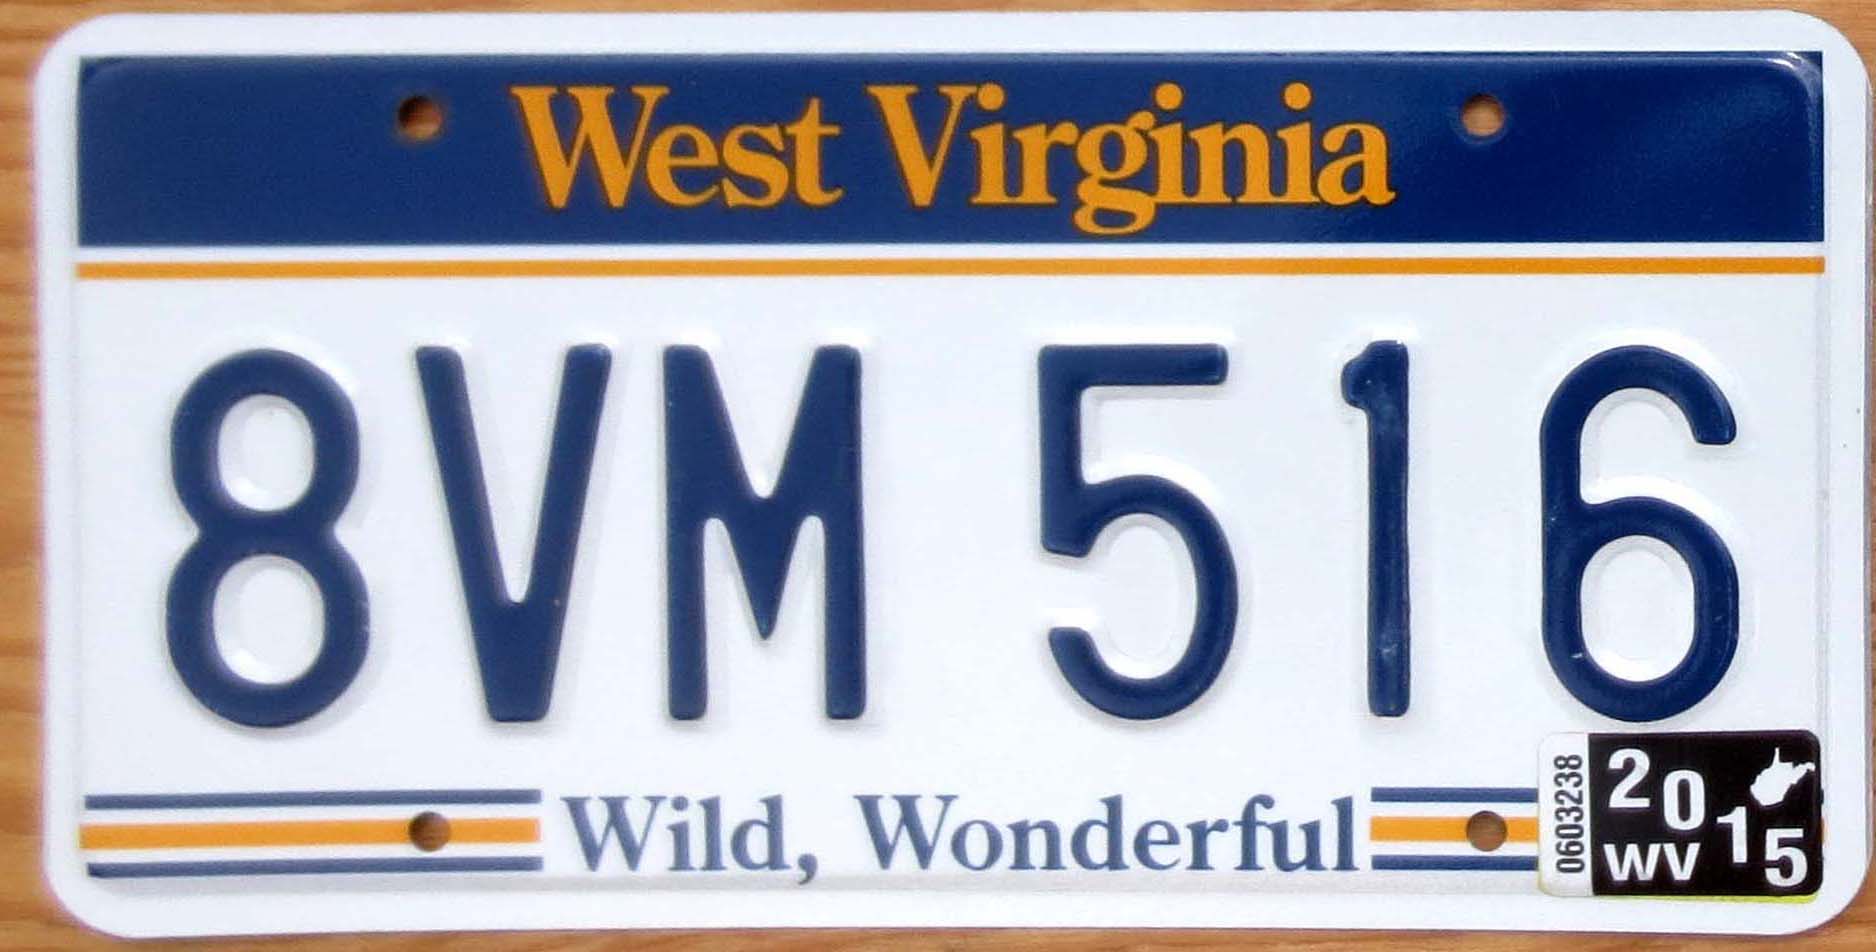 West Virginia Product categories Automobile License Plate Store